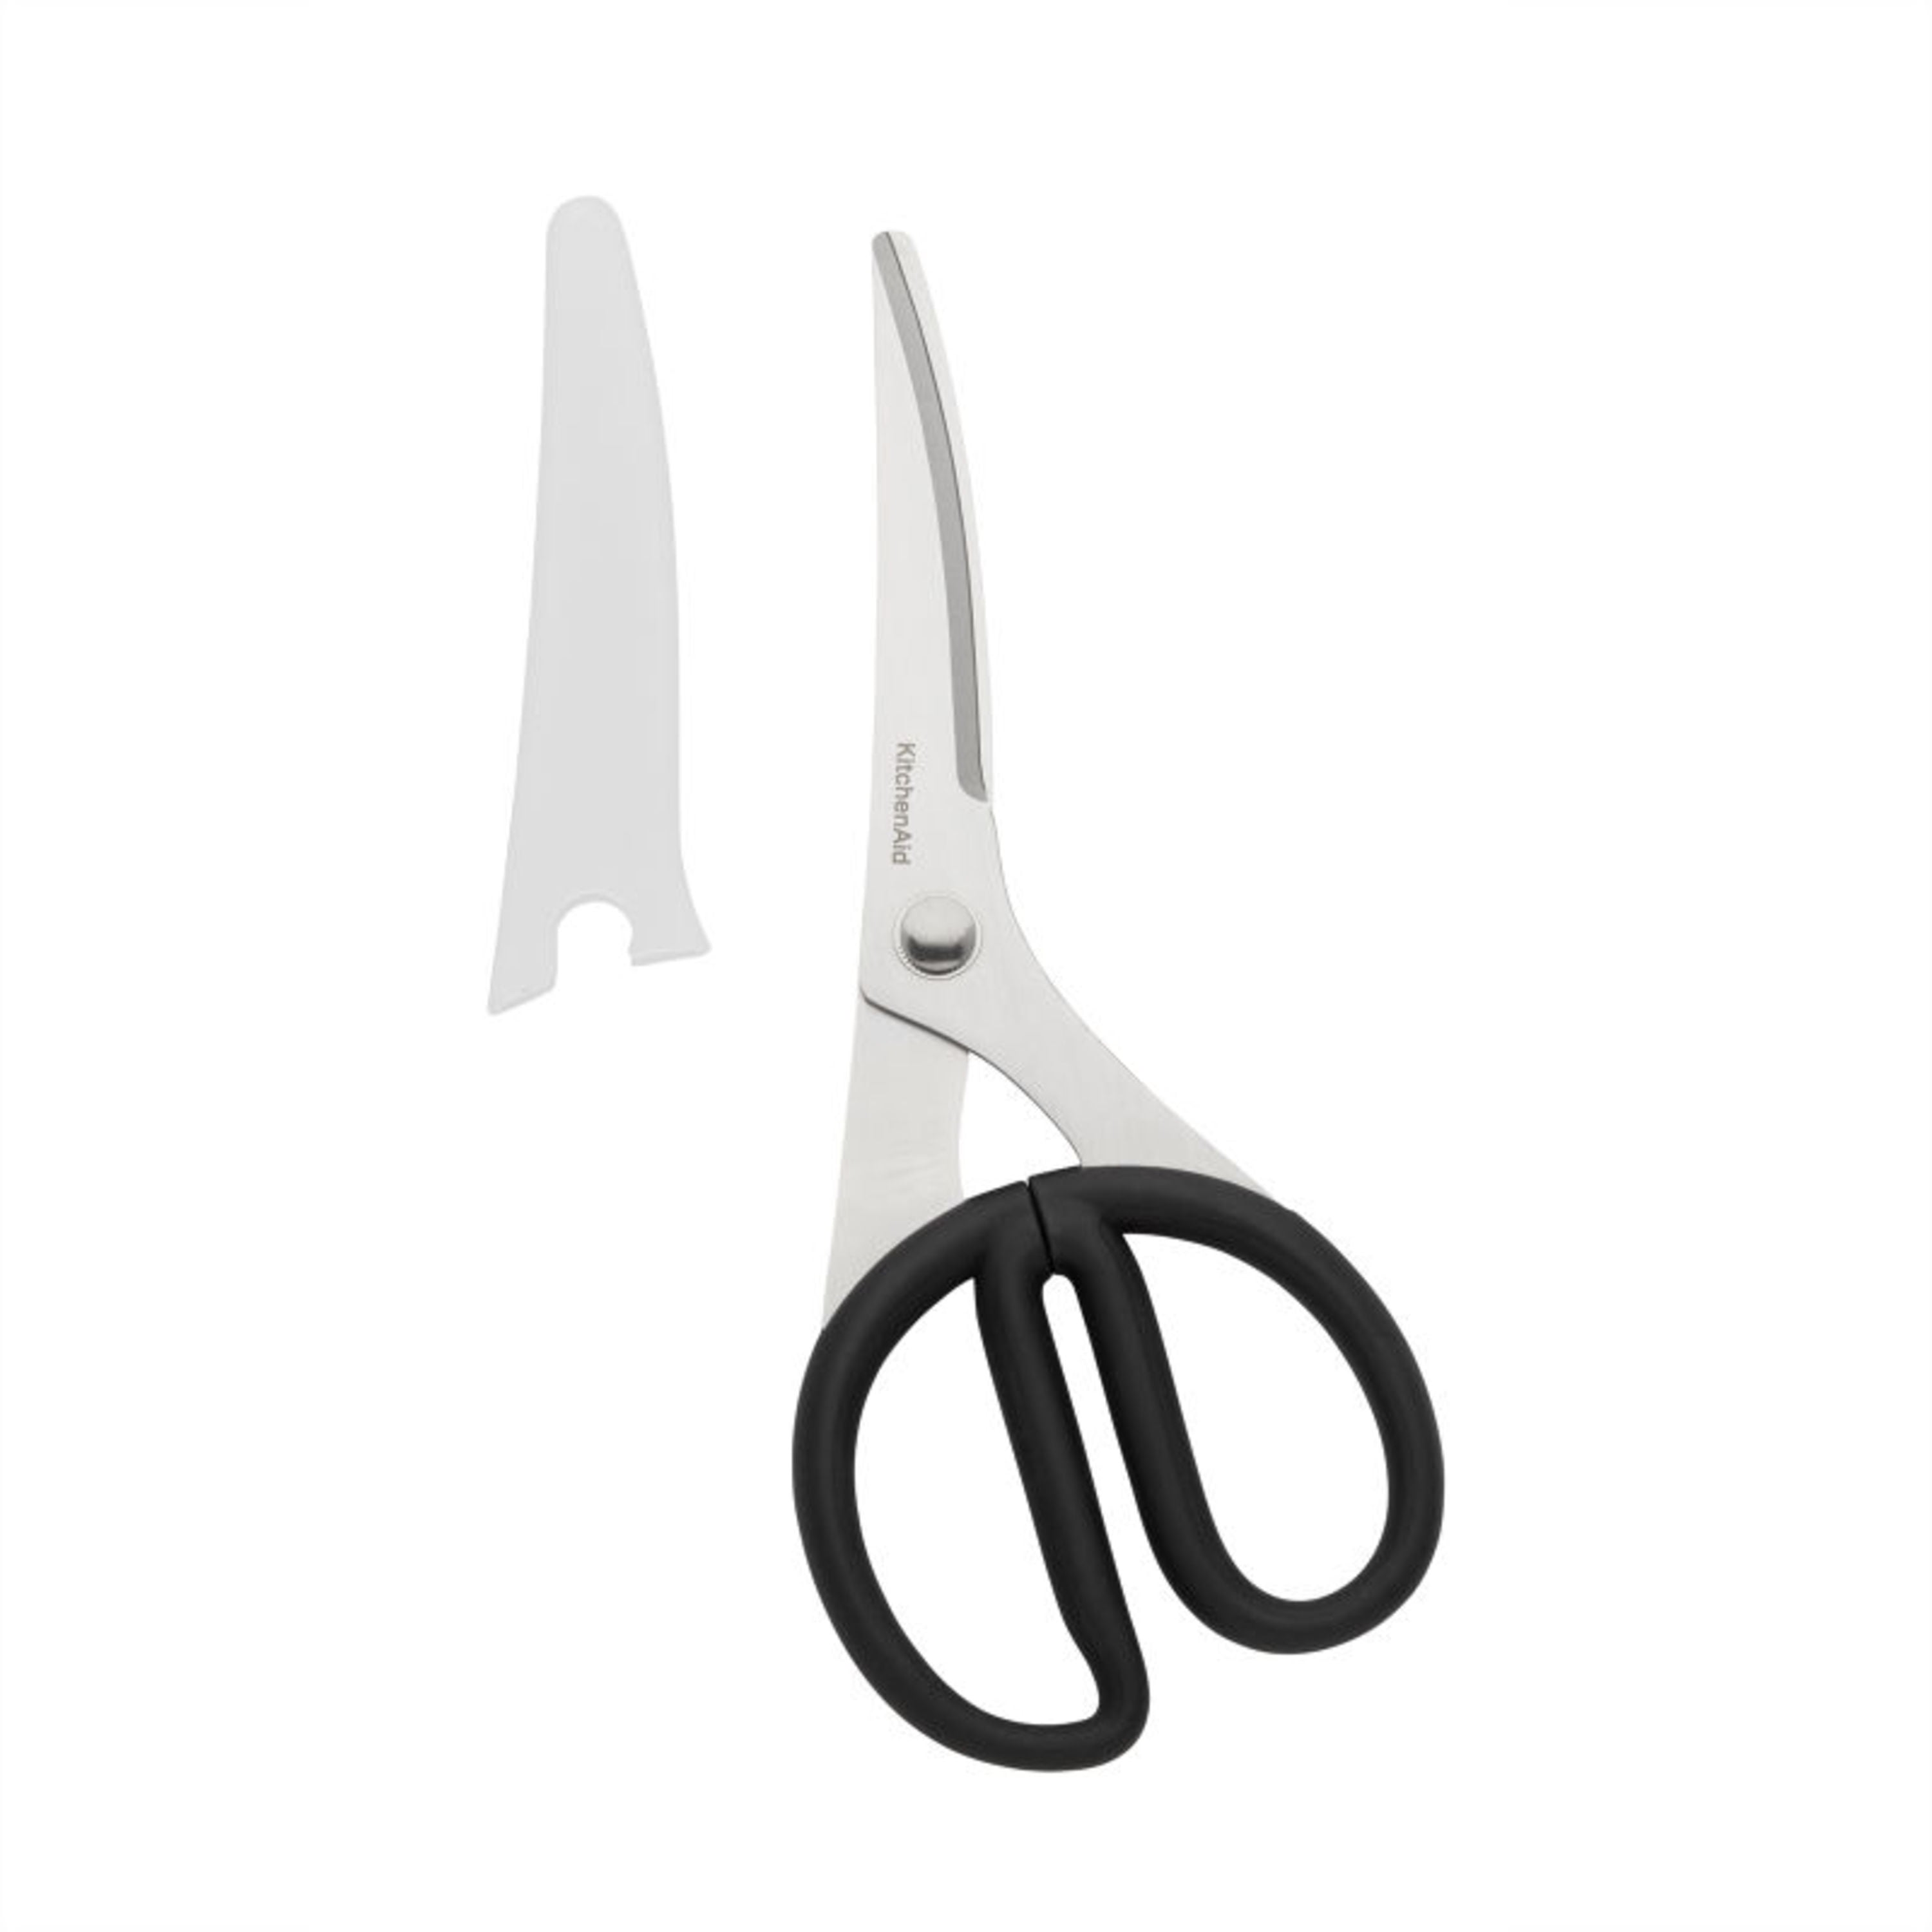 KitchenAid Universal Stainless Steel Shears Black Poultry